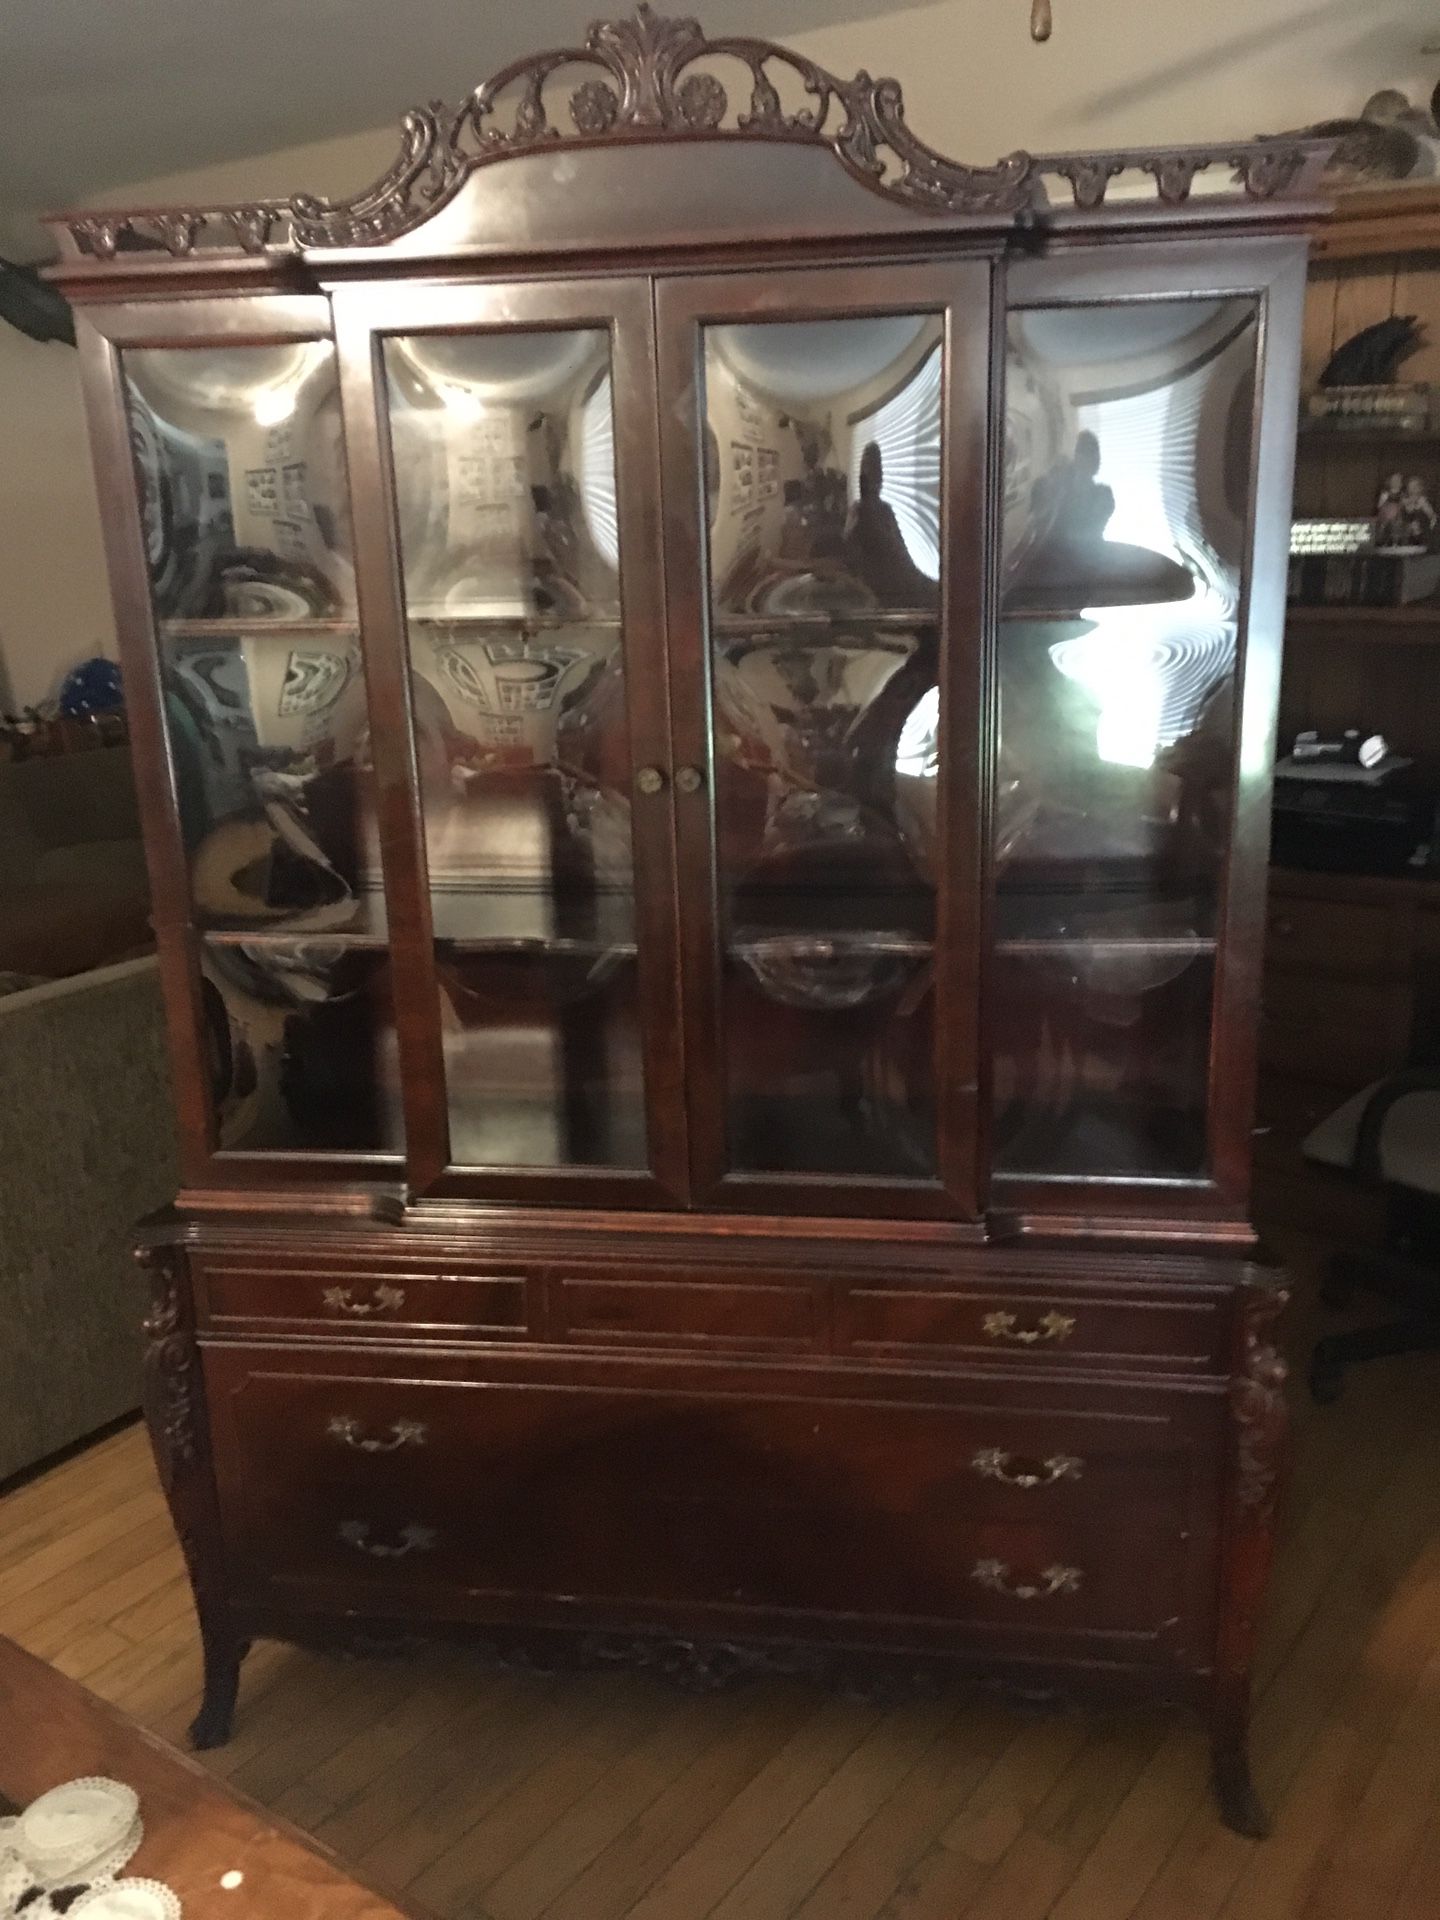 Antique cabinet cherrywood and beautiful bowed glass asking 600 from my grandma probably 1920’s